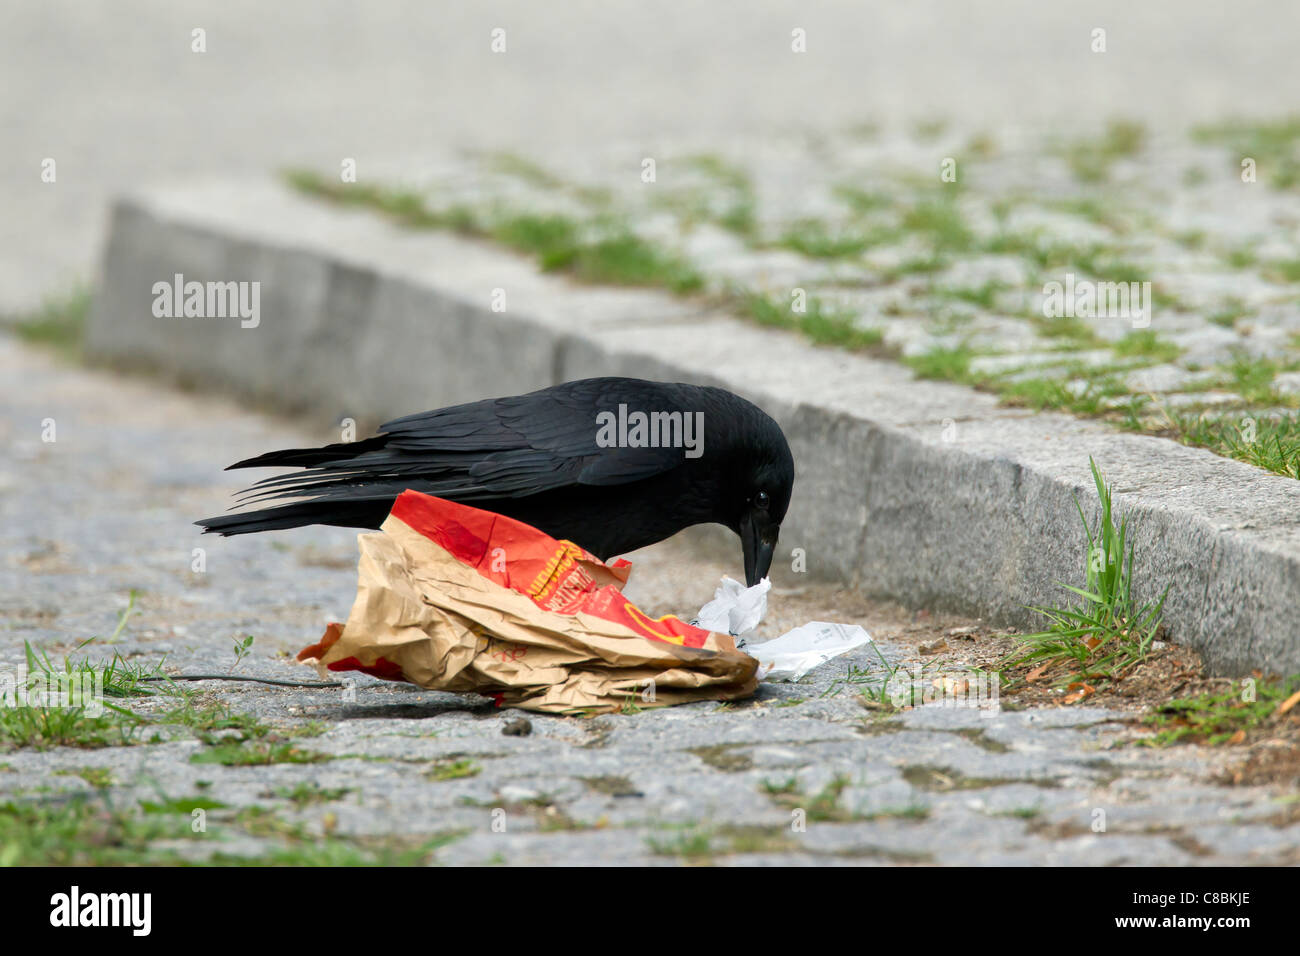 Carrion crow (Corvus corone) scavenging for food in garbage on street, Germany Stock Photo